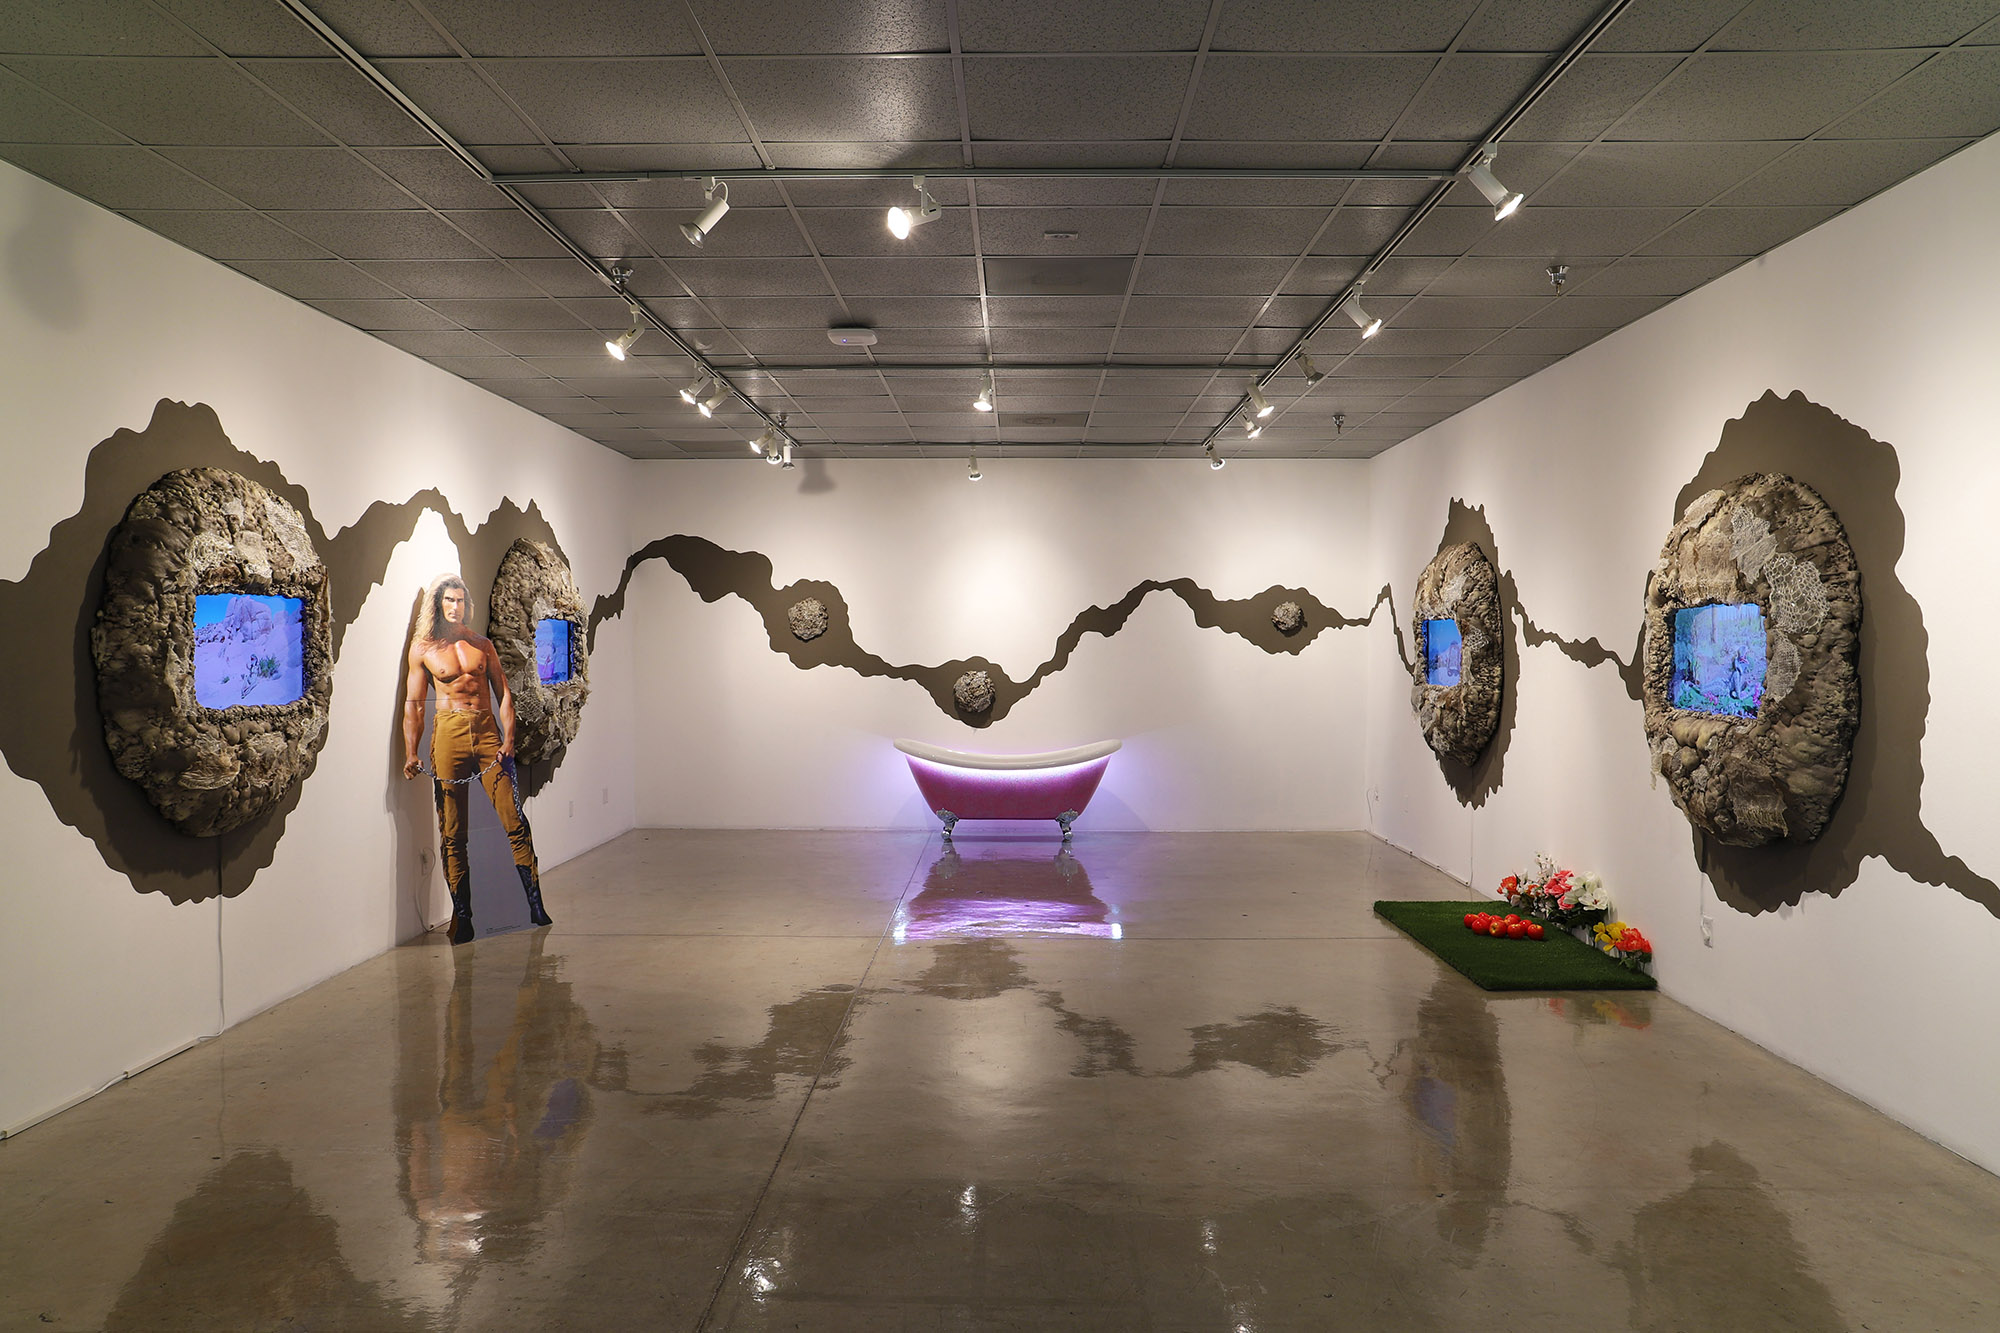 Image of Maria Shaltout’s Snake Woman multimedia installation. Four video screens set within brown mounds of dirt are hung on opposing white walls with brown painted uneven lines that surround the room and connect them all together. A pink bathtub with lights sits against the back wall and a life-sized cutout figure of a shirtless man stands against the left wall. Green turf and bunches of multi-colored silk flowers sit on the floor against the right wall.